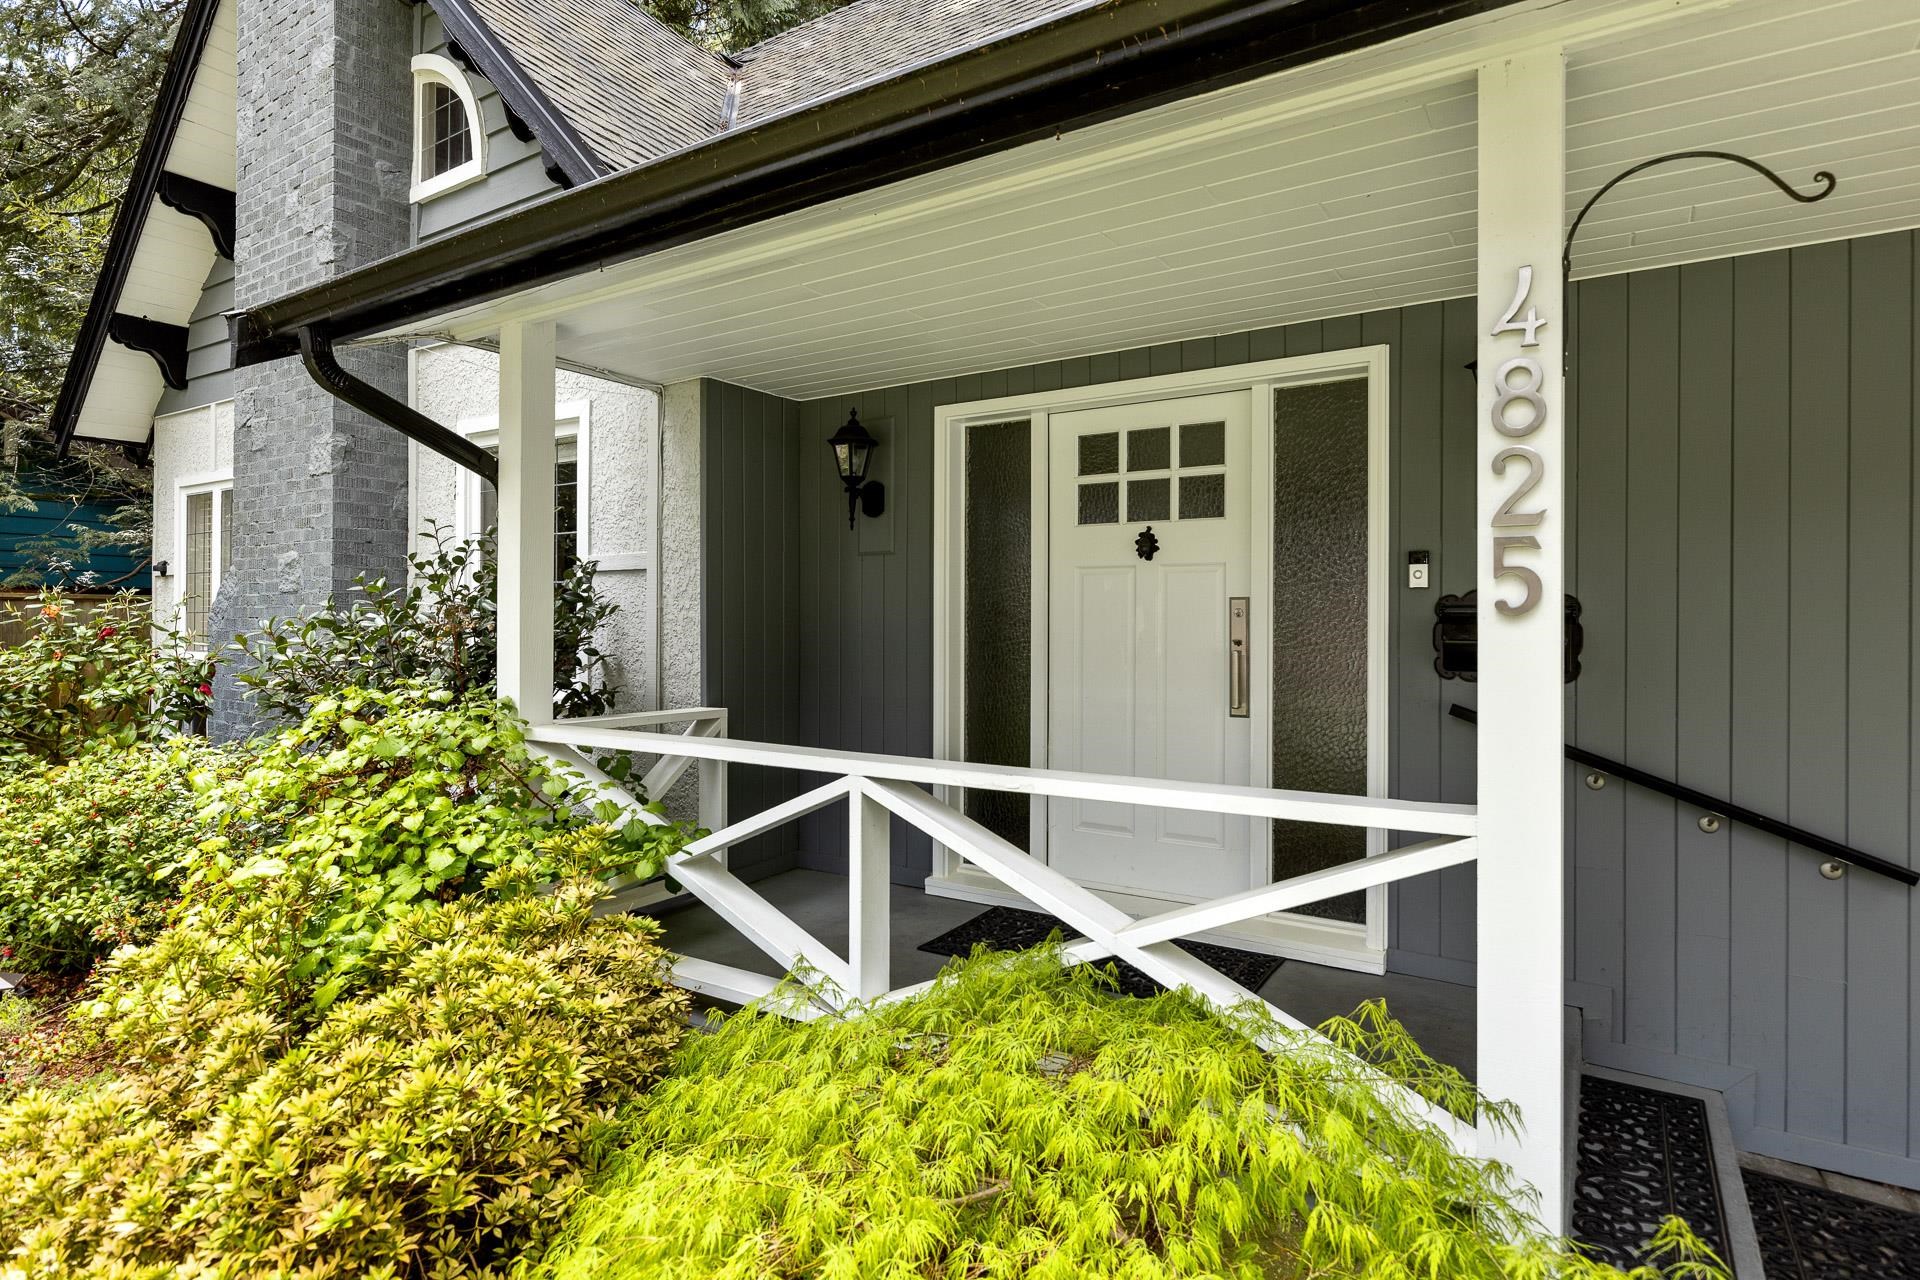 Listing image of 4825 CAPILANO ROAD